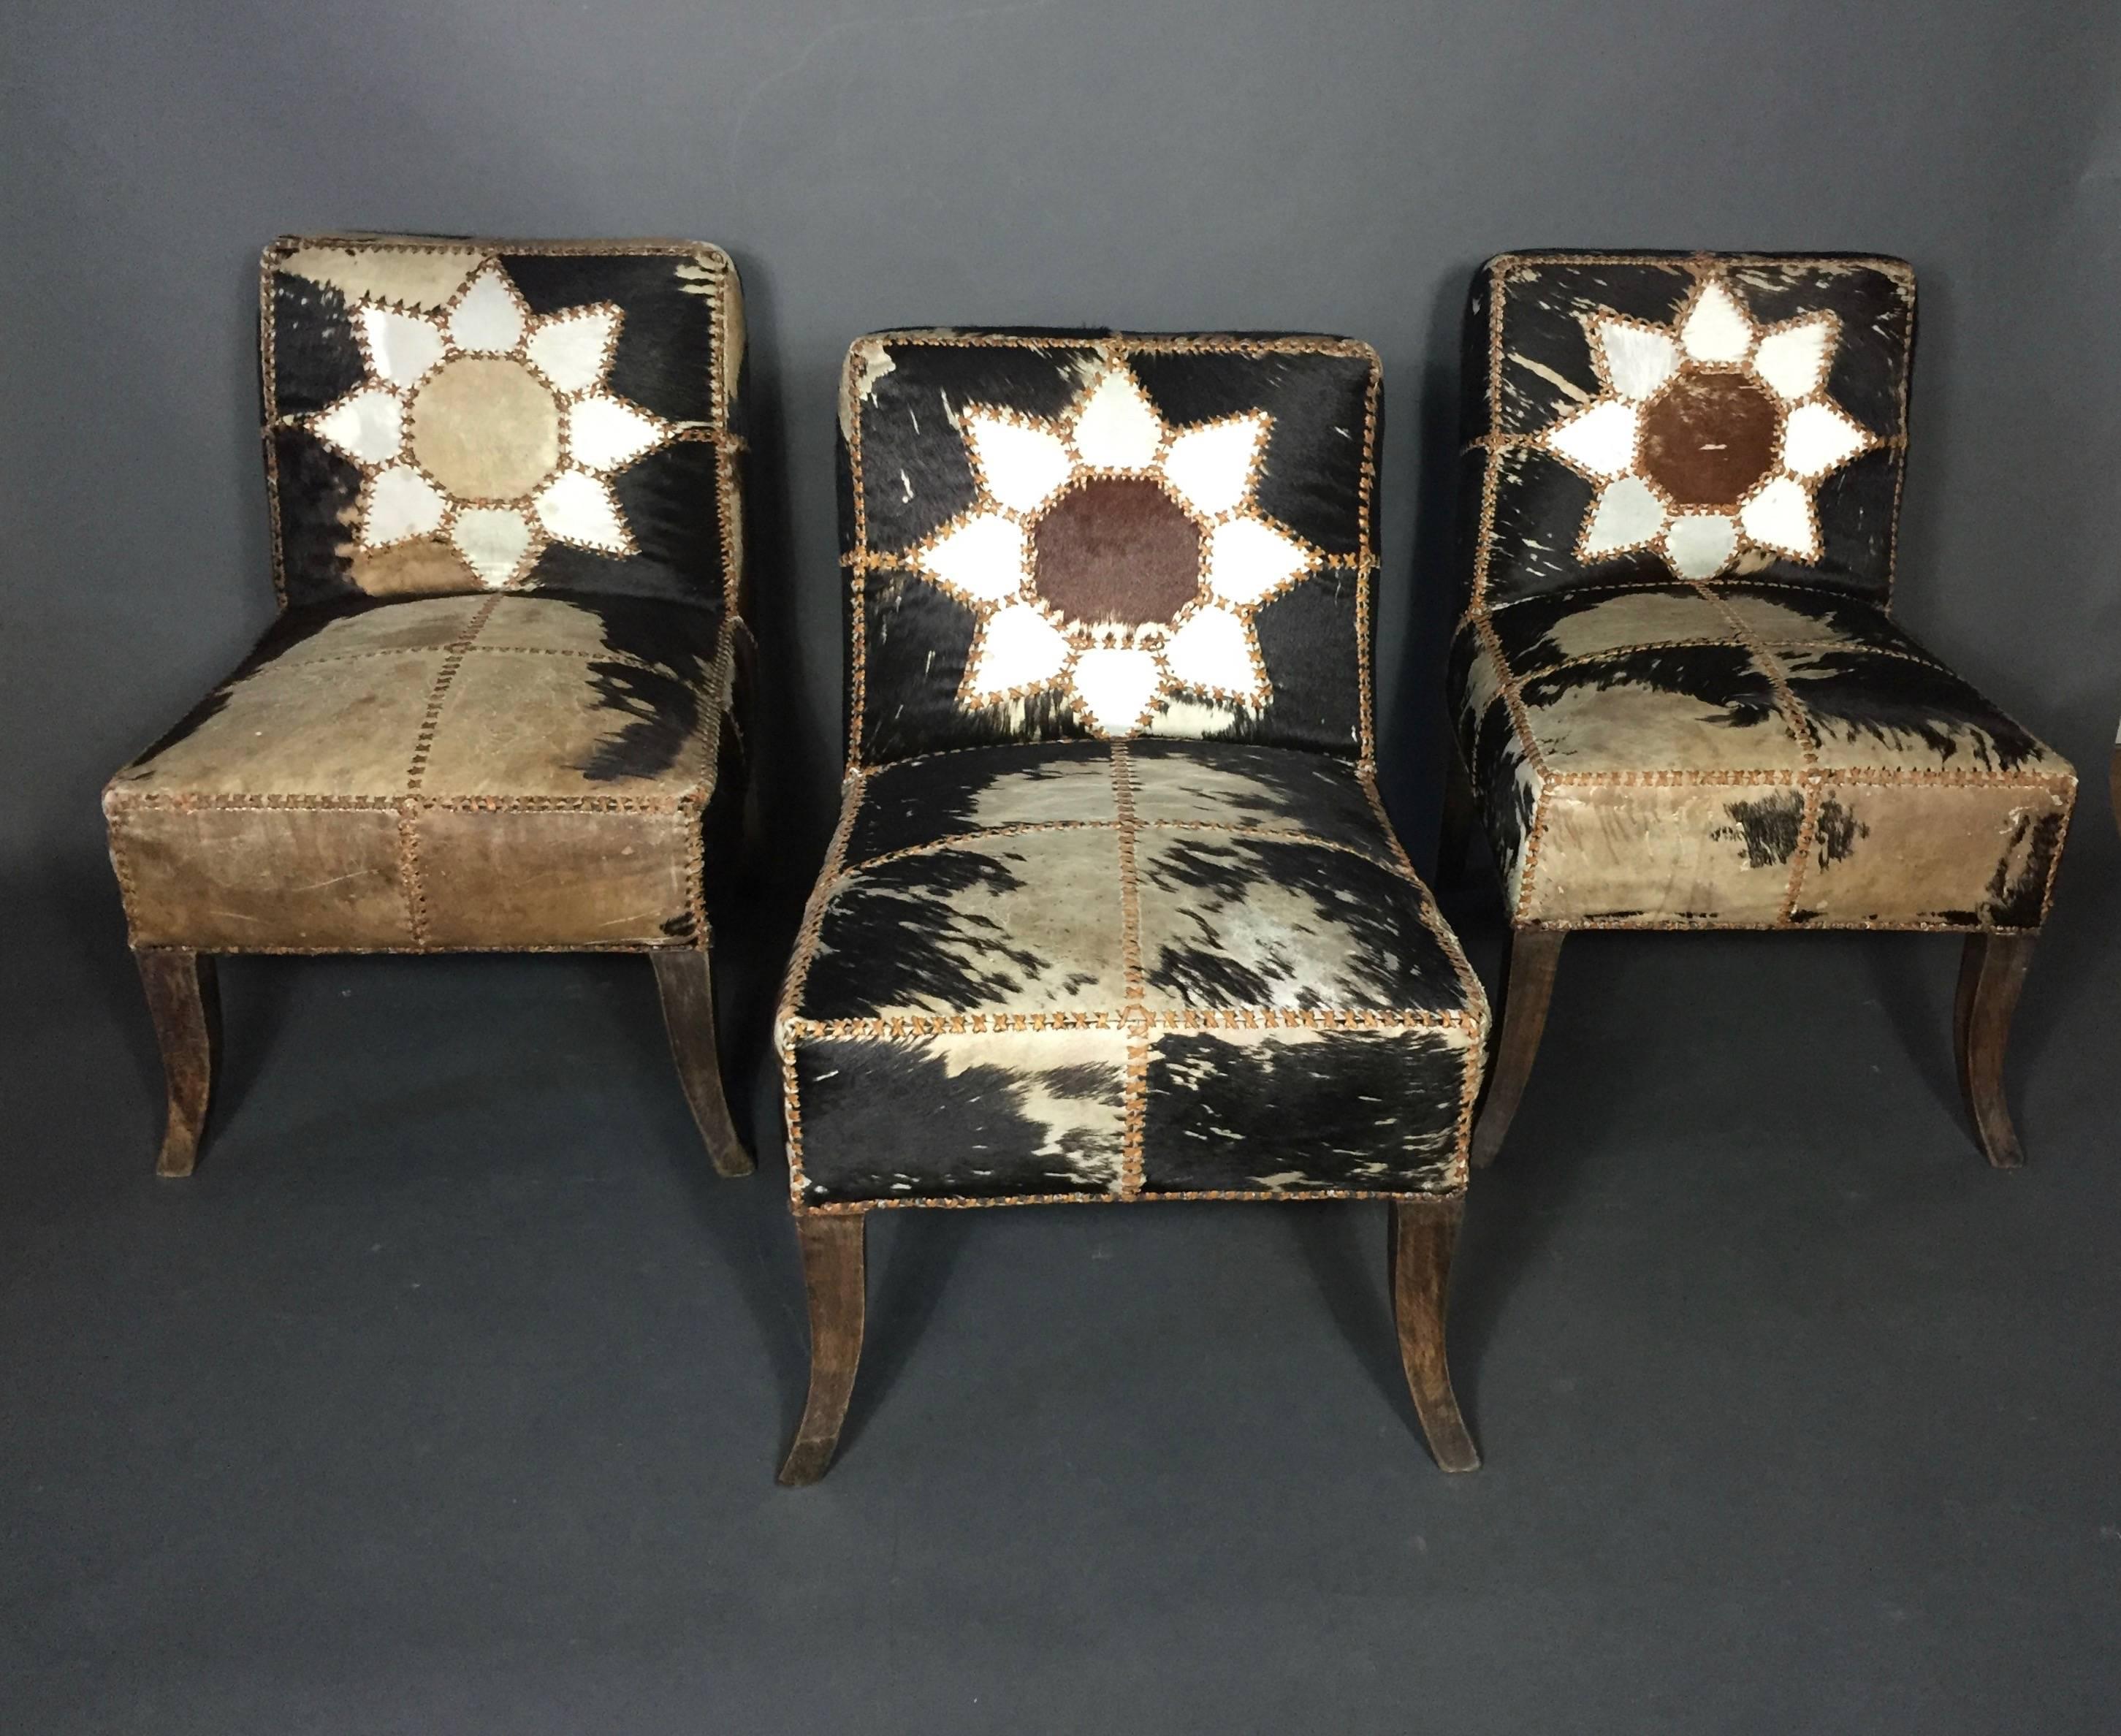 Early 20th Century French-Arab Art Deco Dining Chairs, Original Horse-Hide, Late 1920s